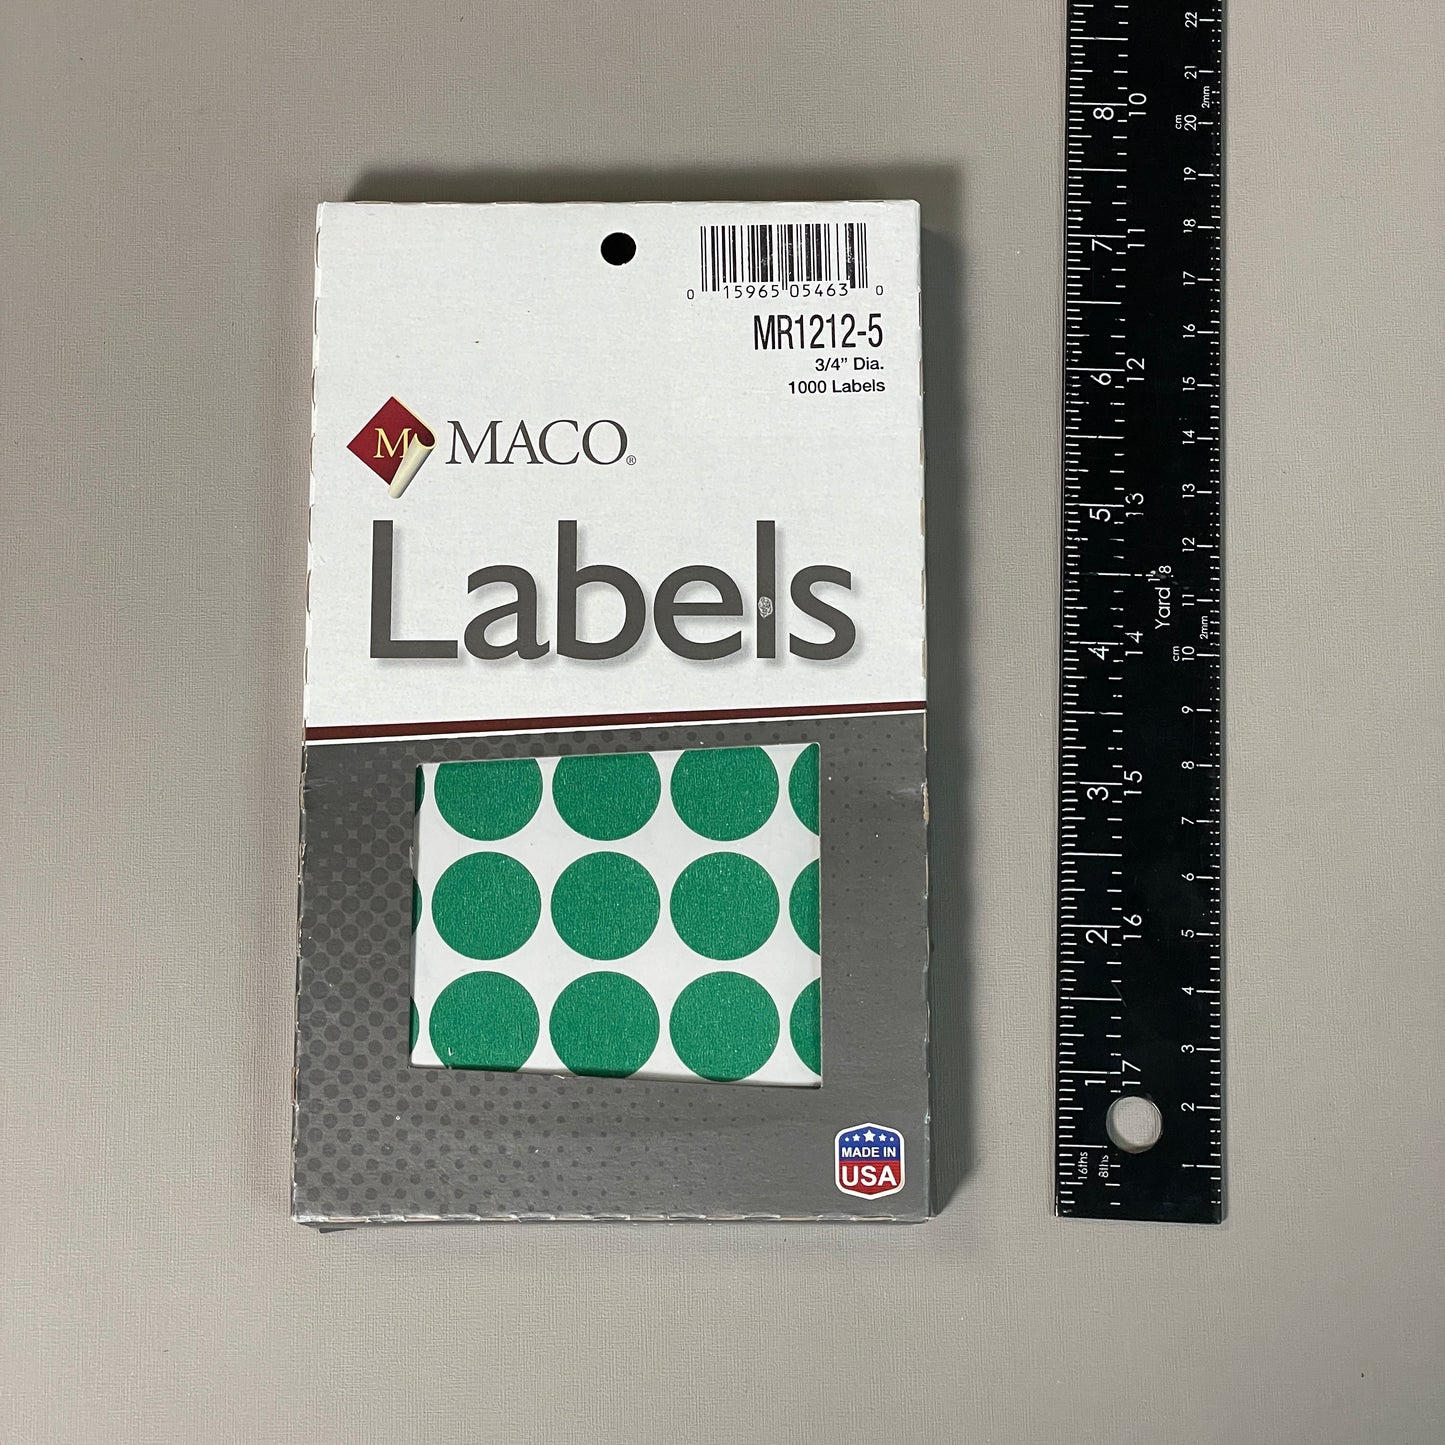 MACO Round GREEN Color-Coding Labels 3/4” Dia. 1000 Labels MR1212-5